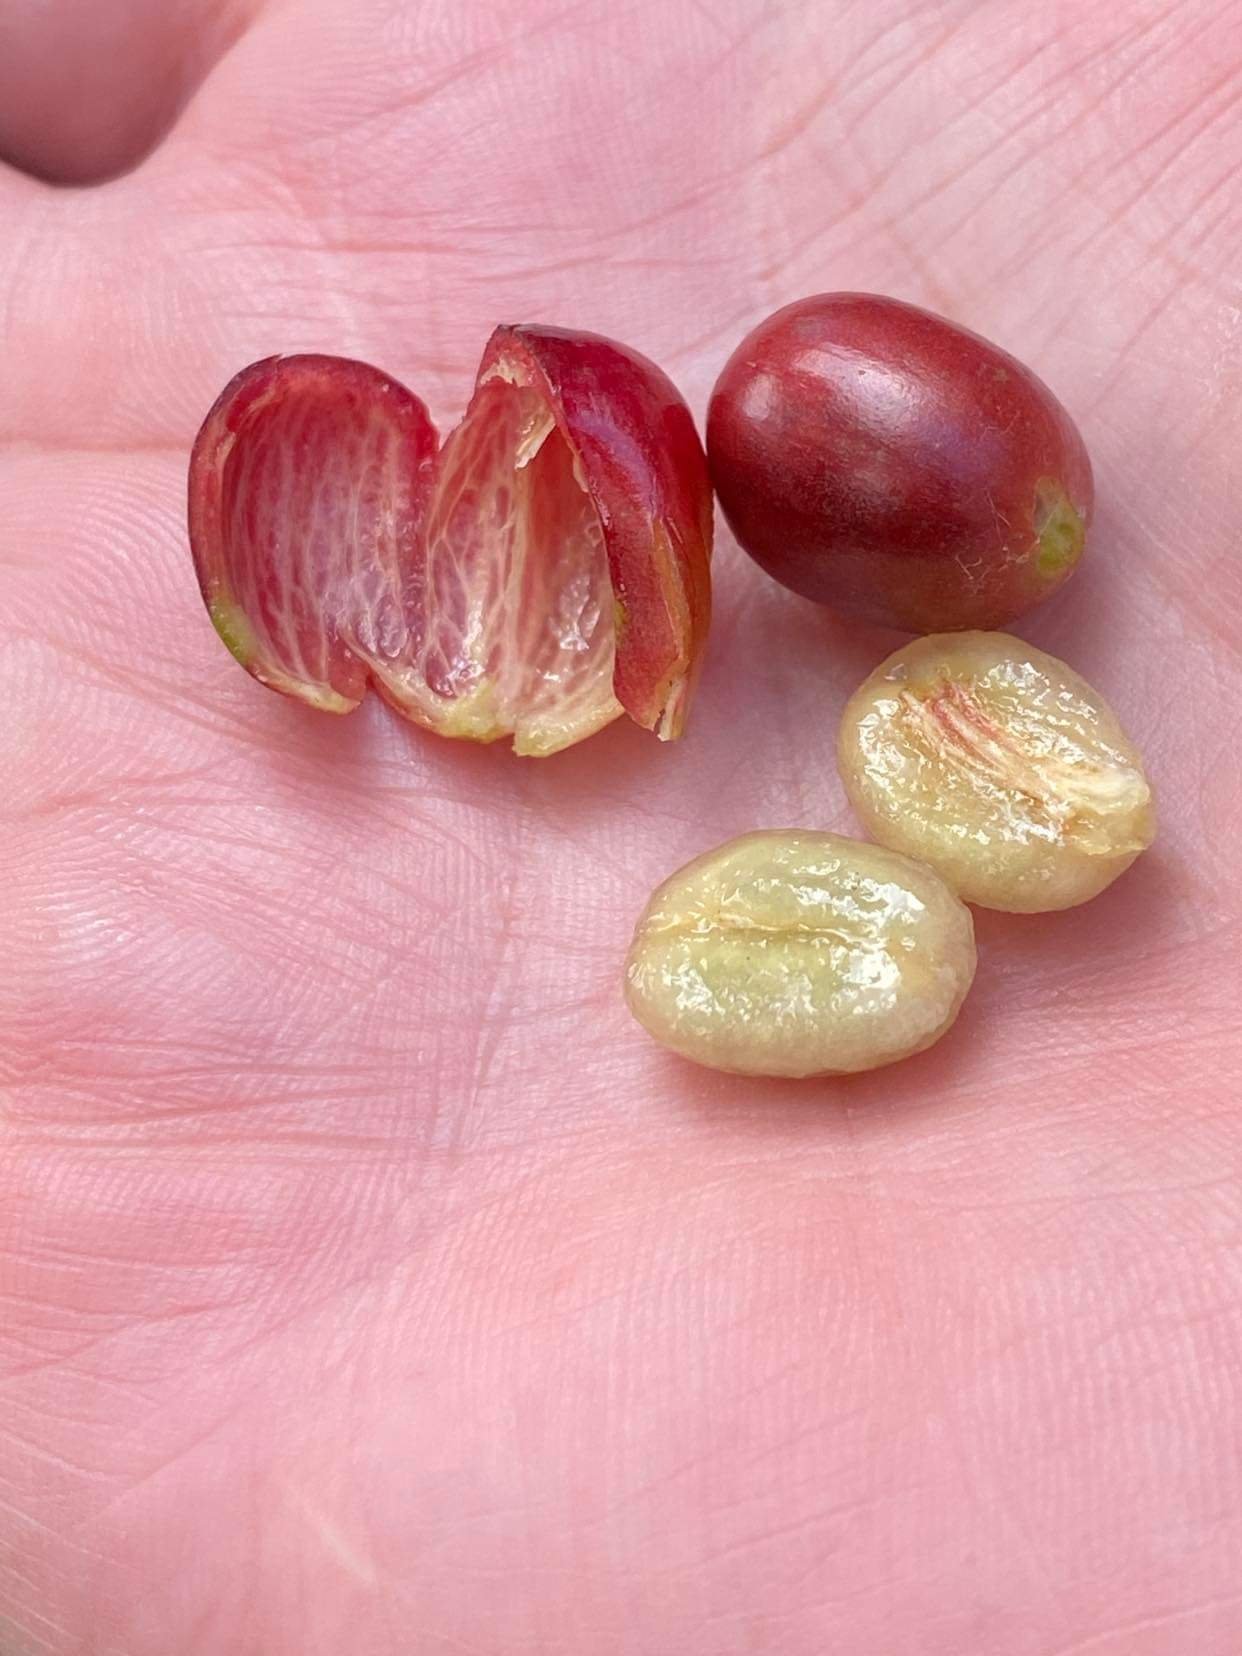  Most coffee fruit contain two beans, but occasionally a fruit will produce only one. This is called a peaberry and Doka Estate separates peaberries from the other beans because they are sweeter. Workers then roast the peaberries and either blend the